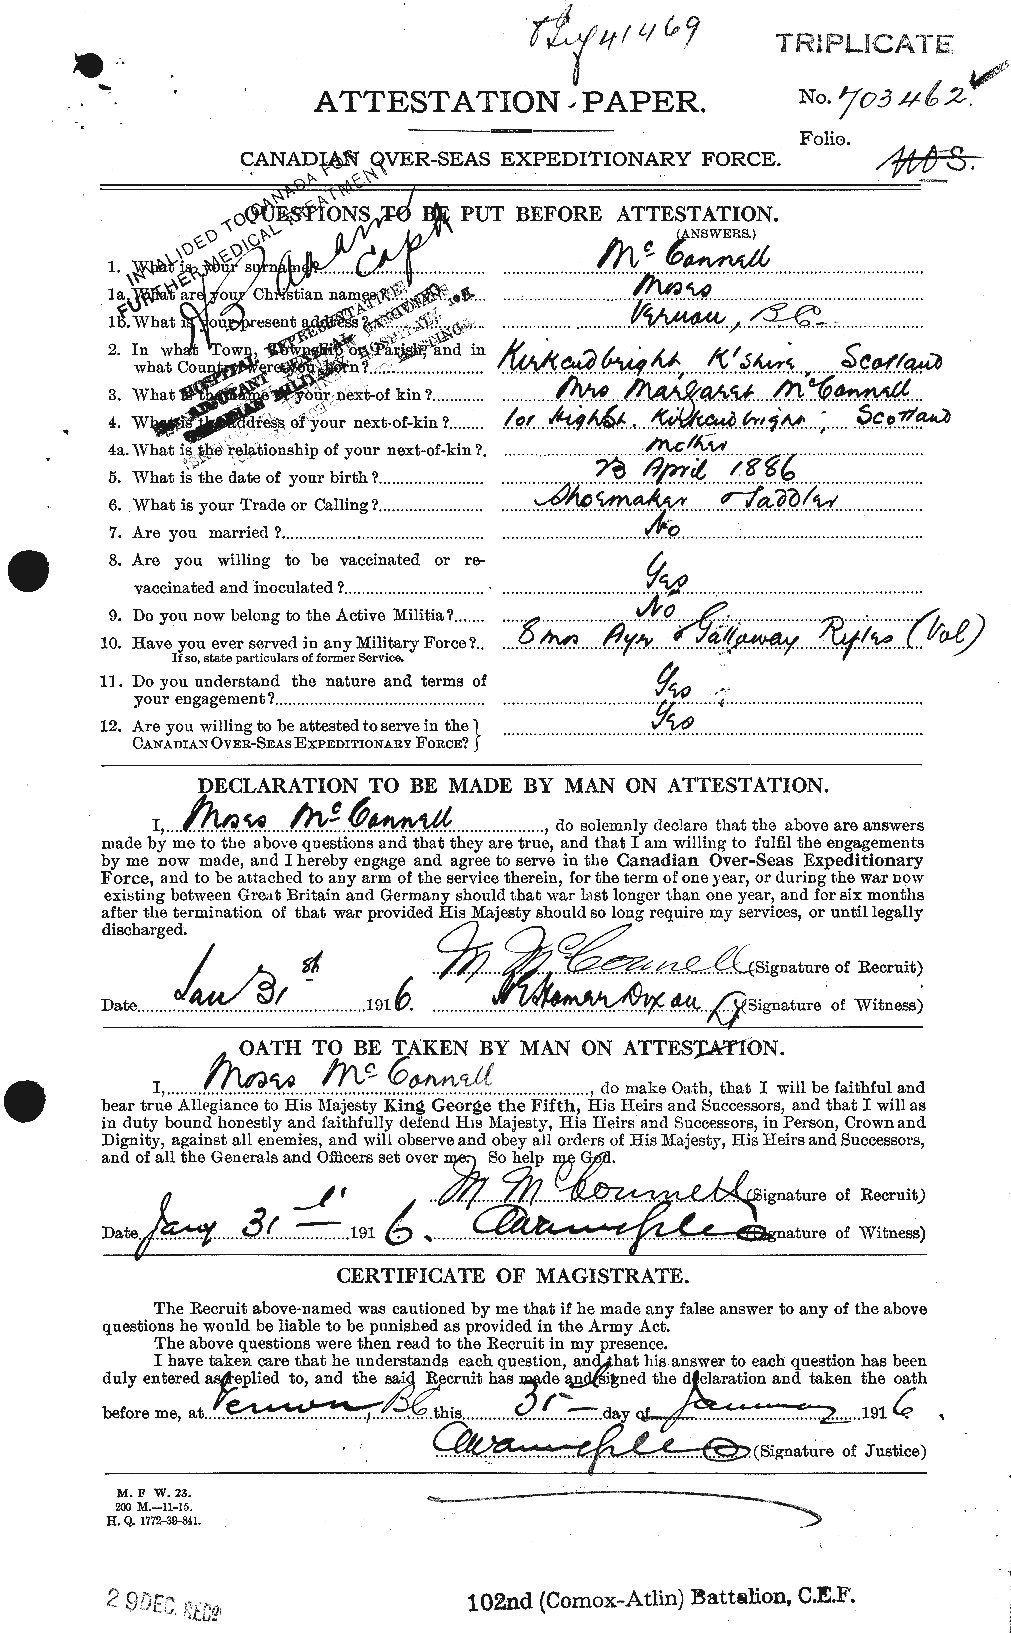 Personnel Records of the First World War - CEF 134411a